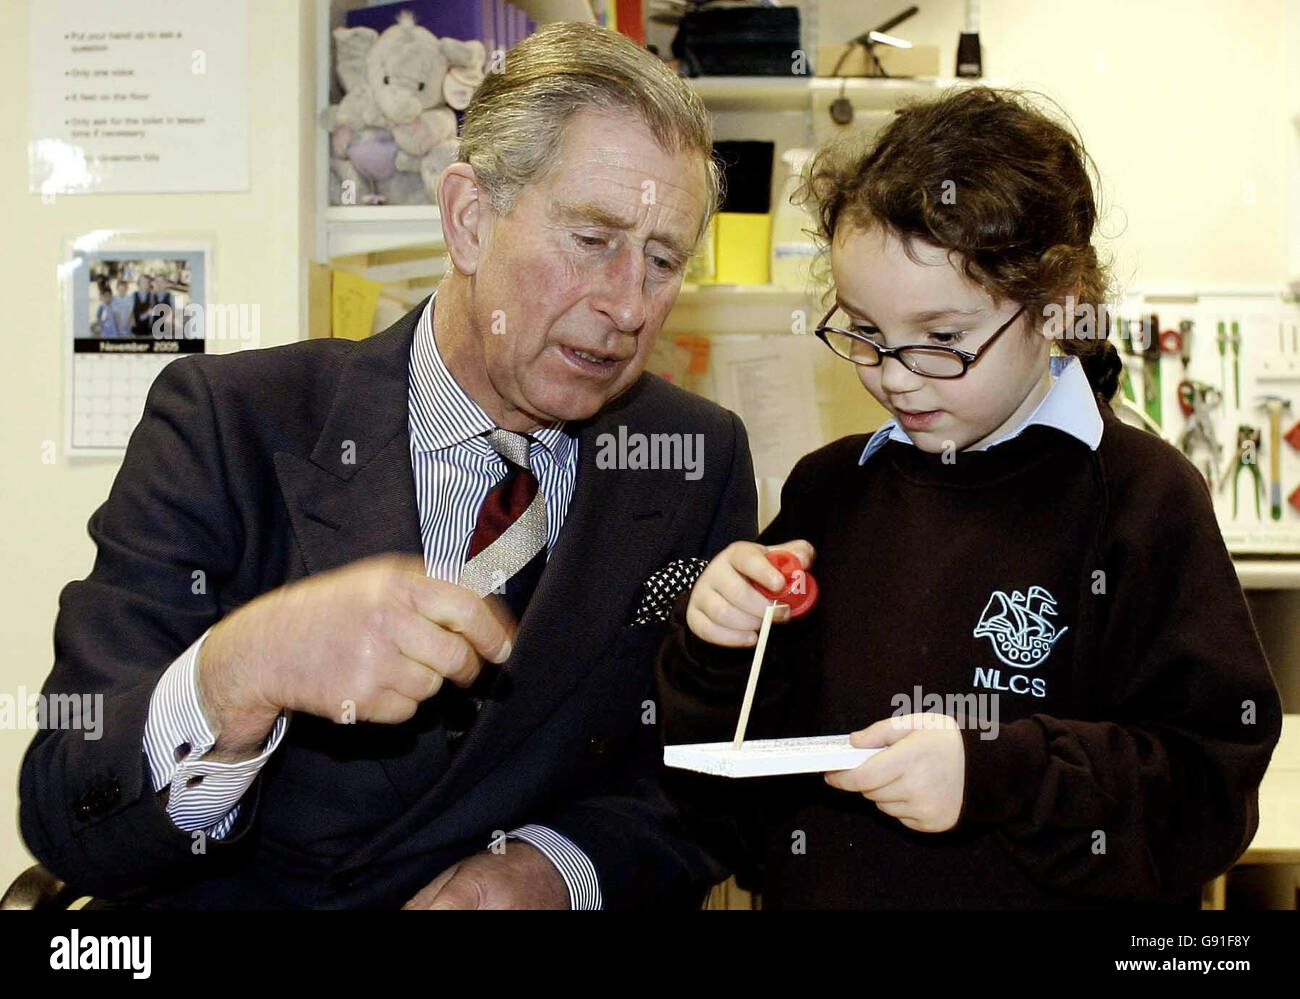 Prince of Wales helps Georgie Strauss, 7, with her woodwork during a visit to the North London Collegiate School, Monday 21 November 2005 after he had earlier met volunteers who are helping rebuild parts of Sri Lanka hit by the Boxing Day tsunami by harnessing methane gas from buffalo.Charles visited the Department for Education and Skills in central London, where he met three women who helped set up an 'eco-centre' in one of the worst hit regions. But they did not manage to tell the Prince about one of their more innovative projects - collecting 'bio-gas' from buffalo faeces to fuel nearby Stock Photo